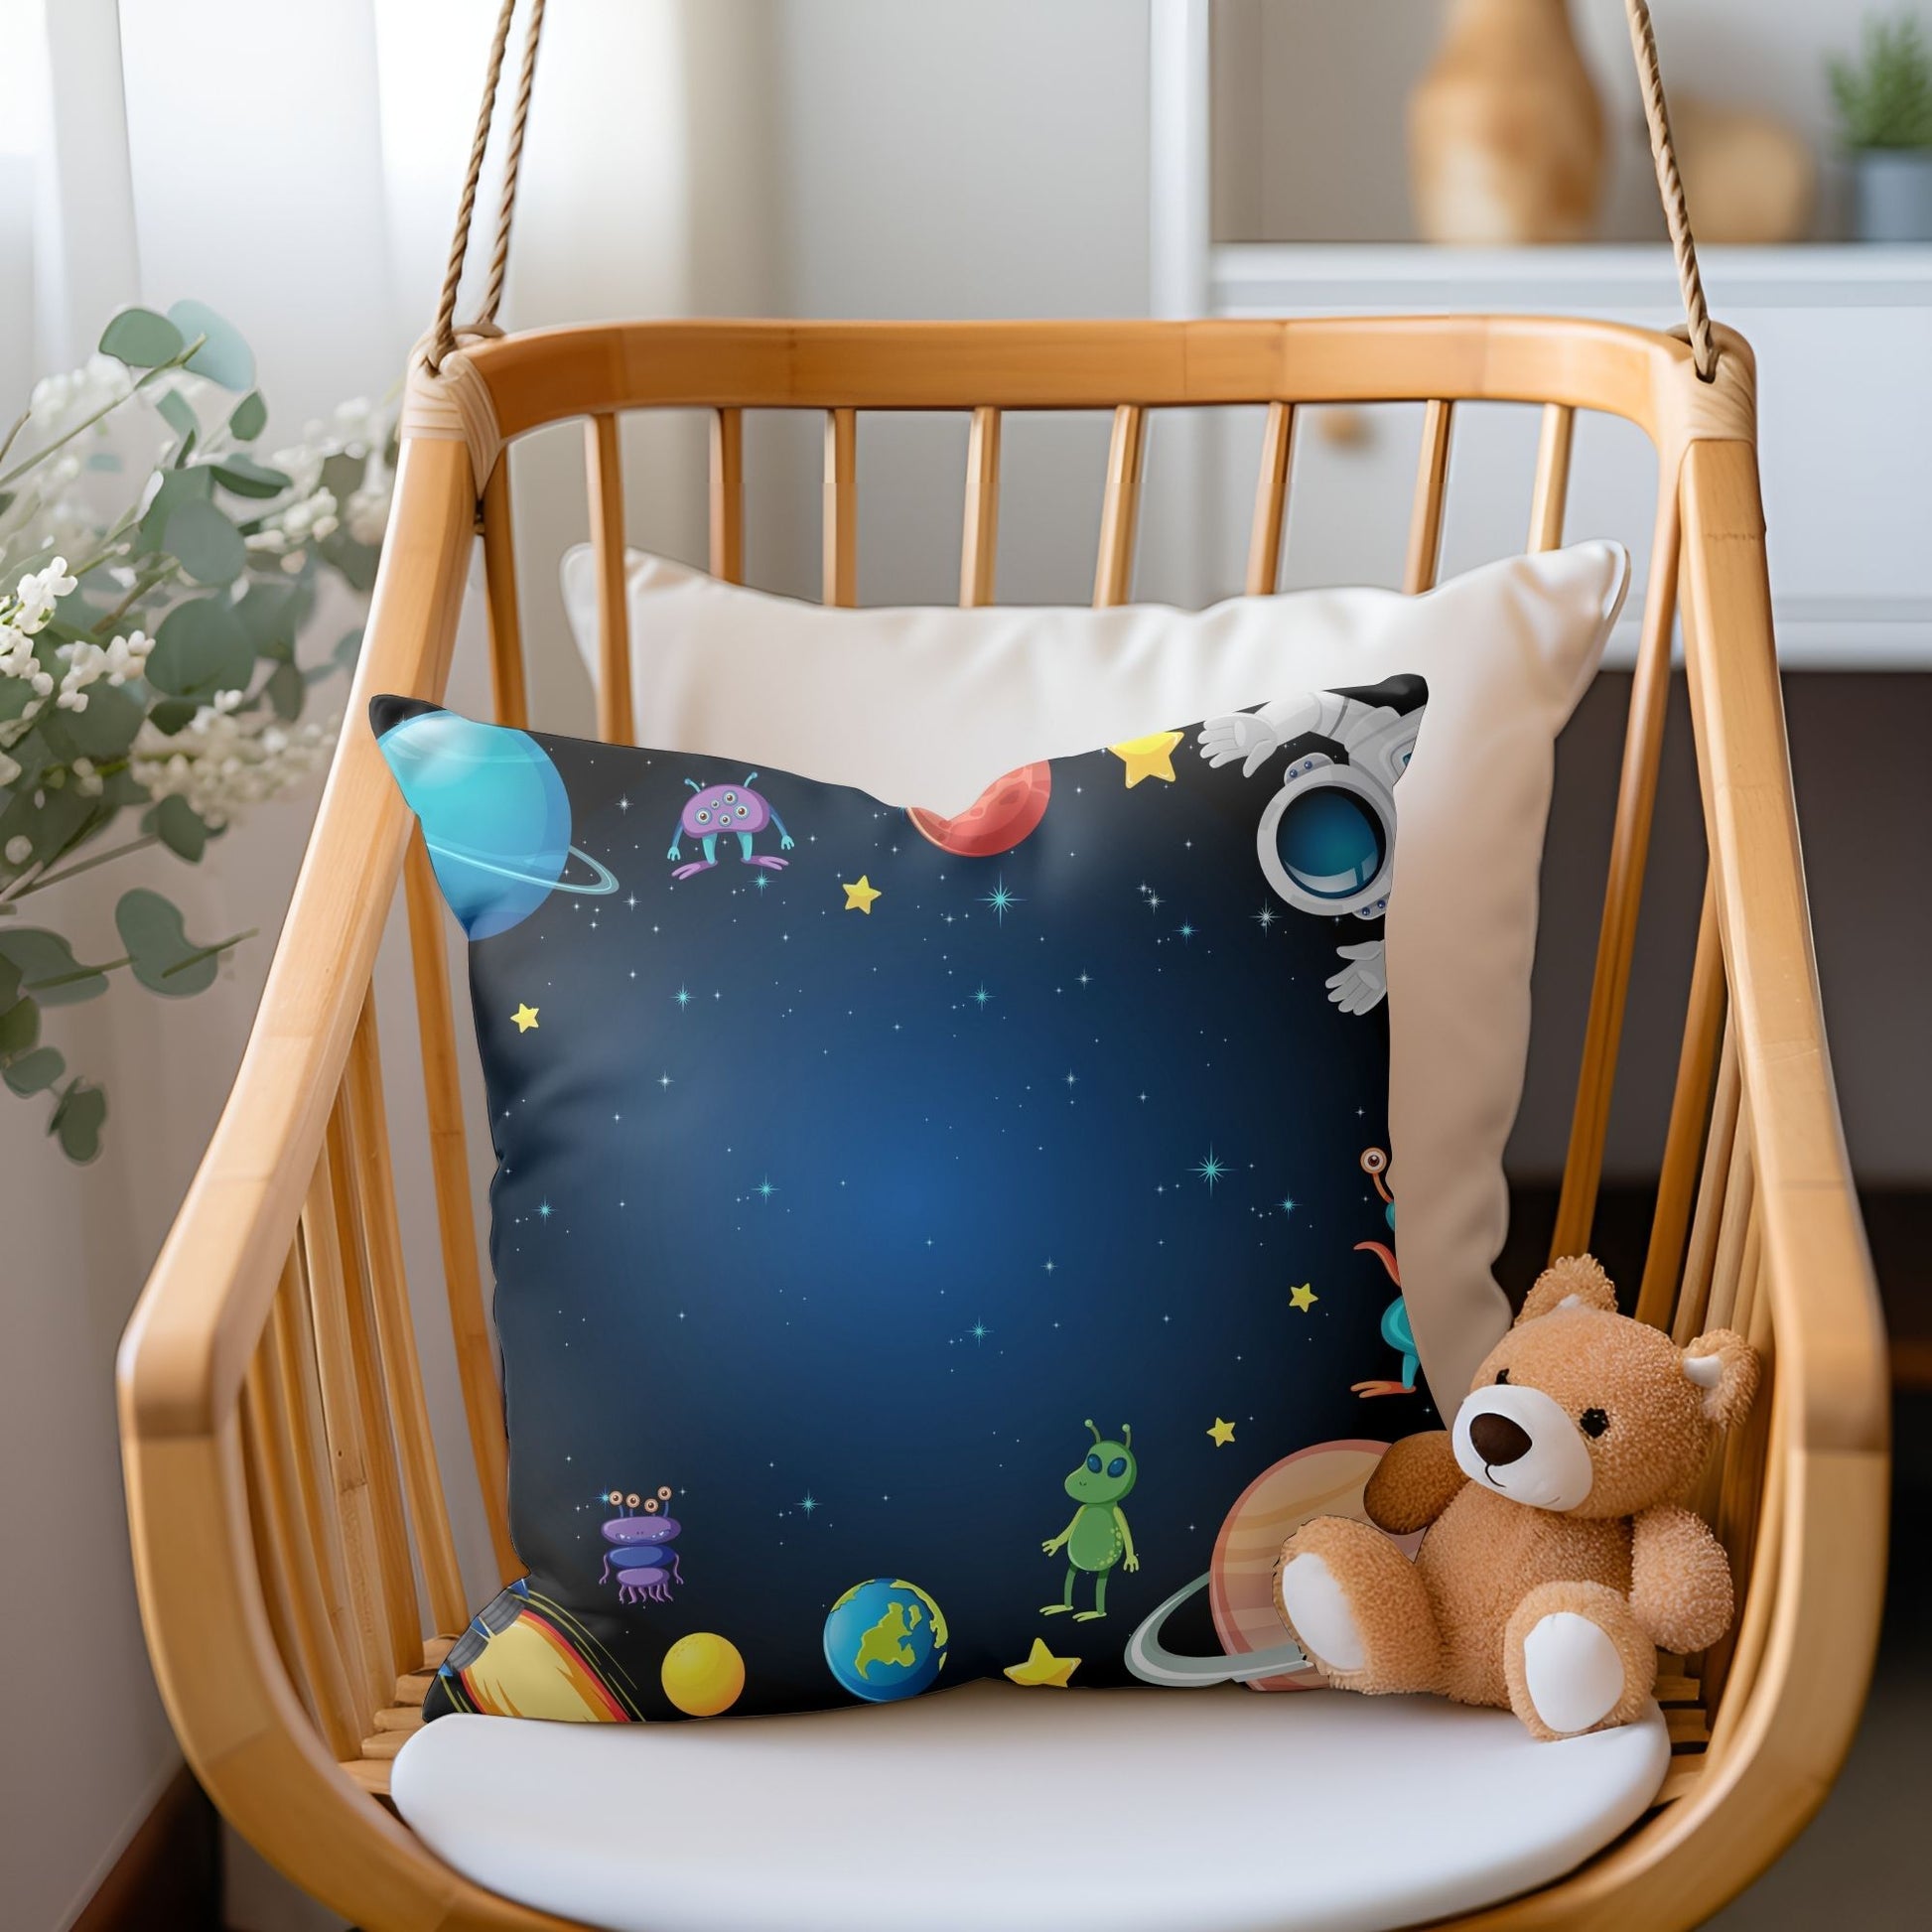 Adorable aliens patterned pillow to add a playful touch to kids' bedrooms.